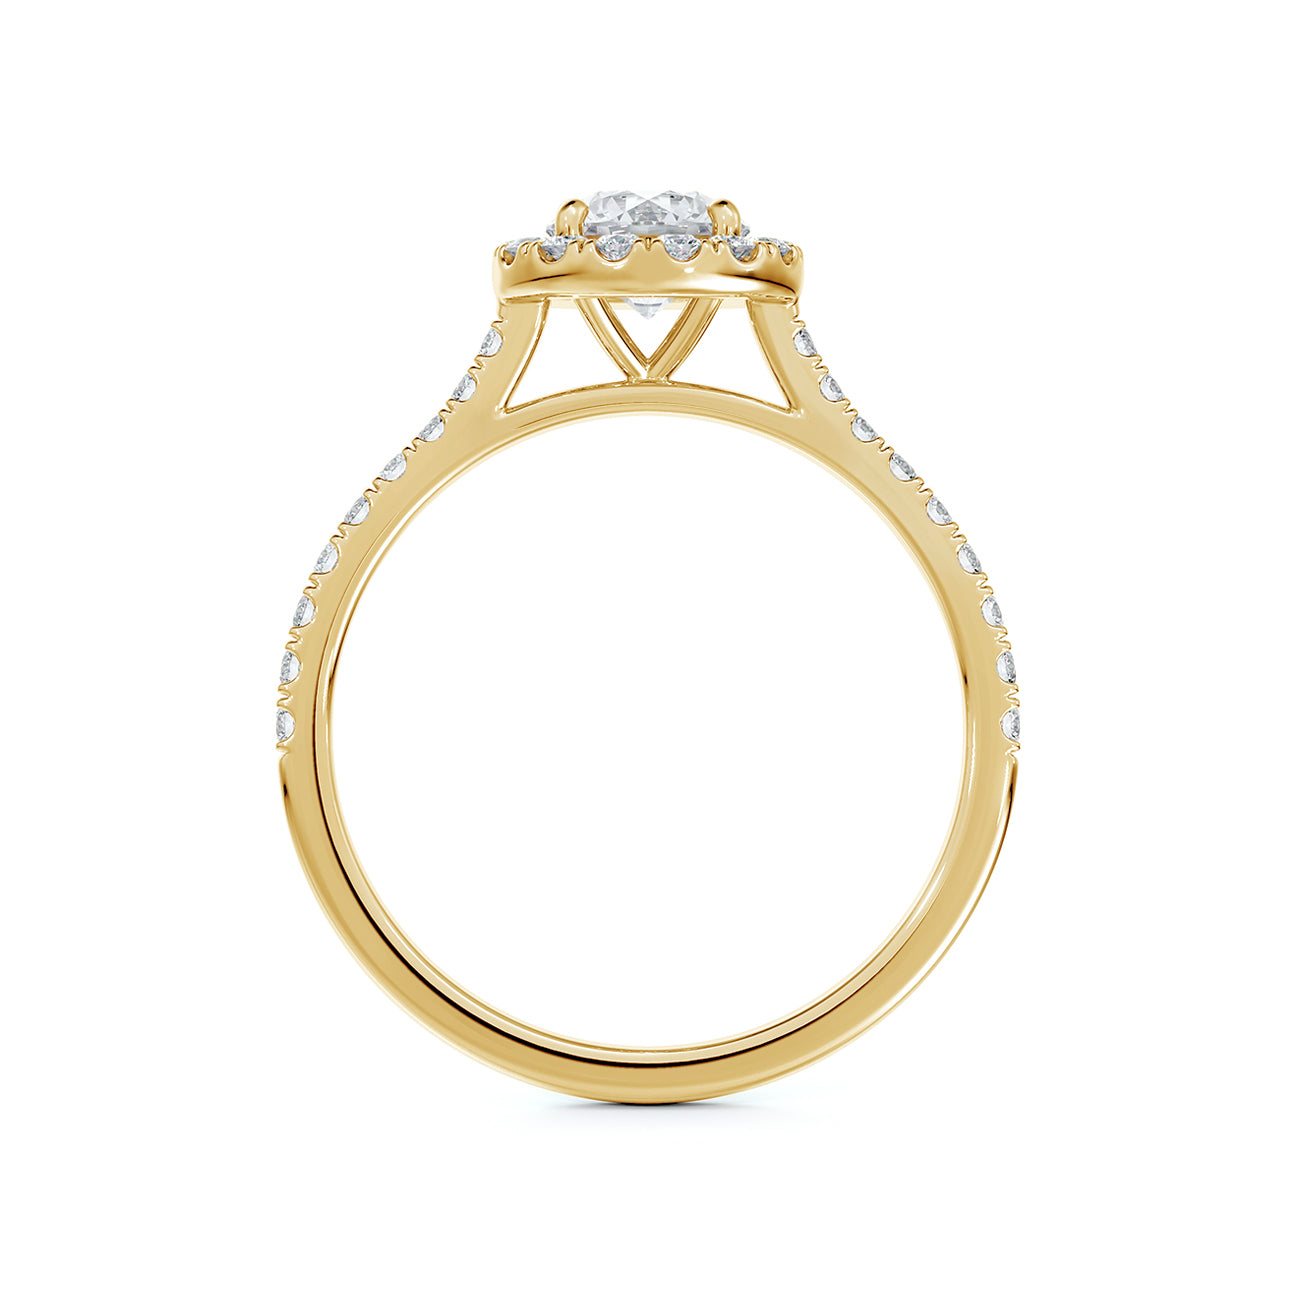 Portfolio by De Beers Forevermark™ Halo Engagement Ring With Pave Band